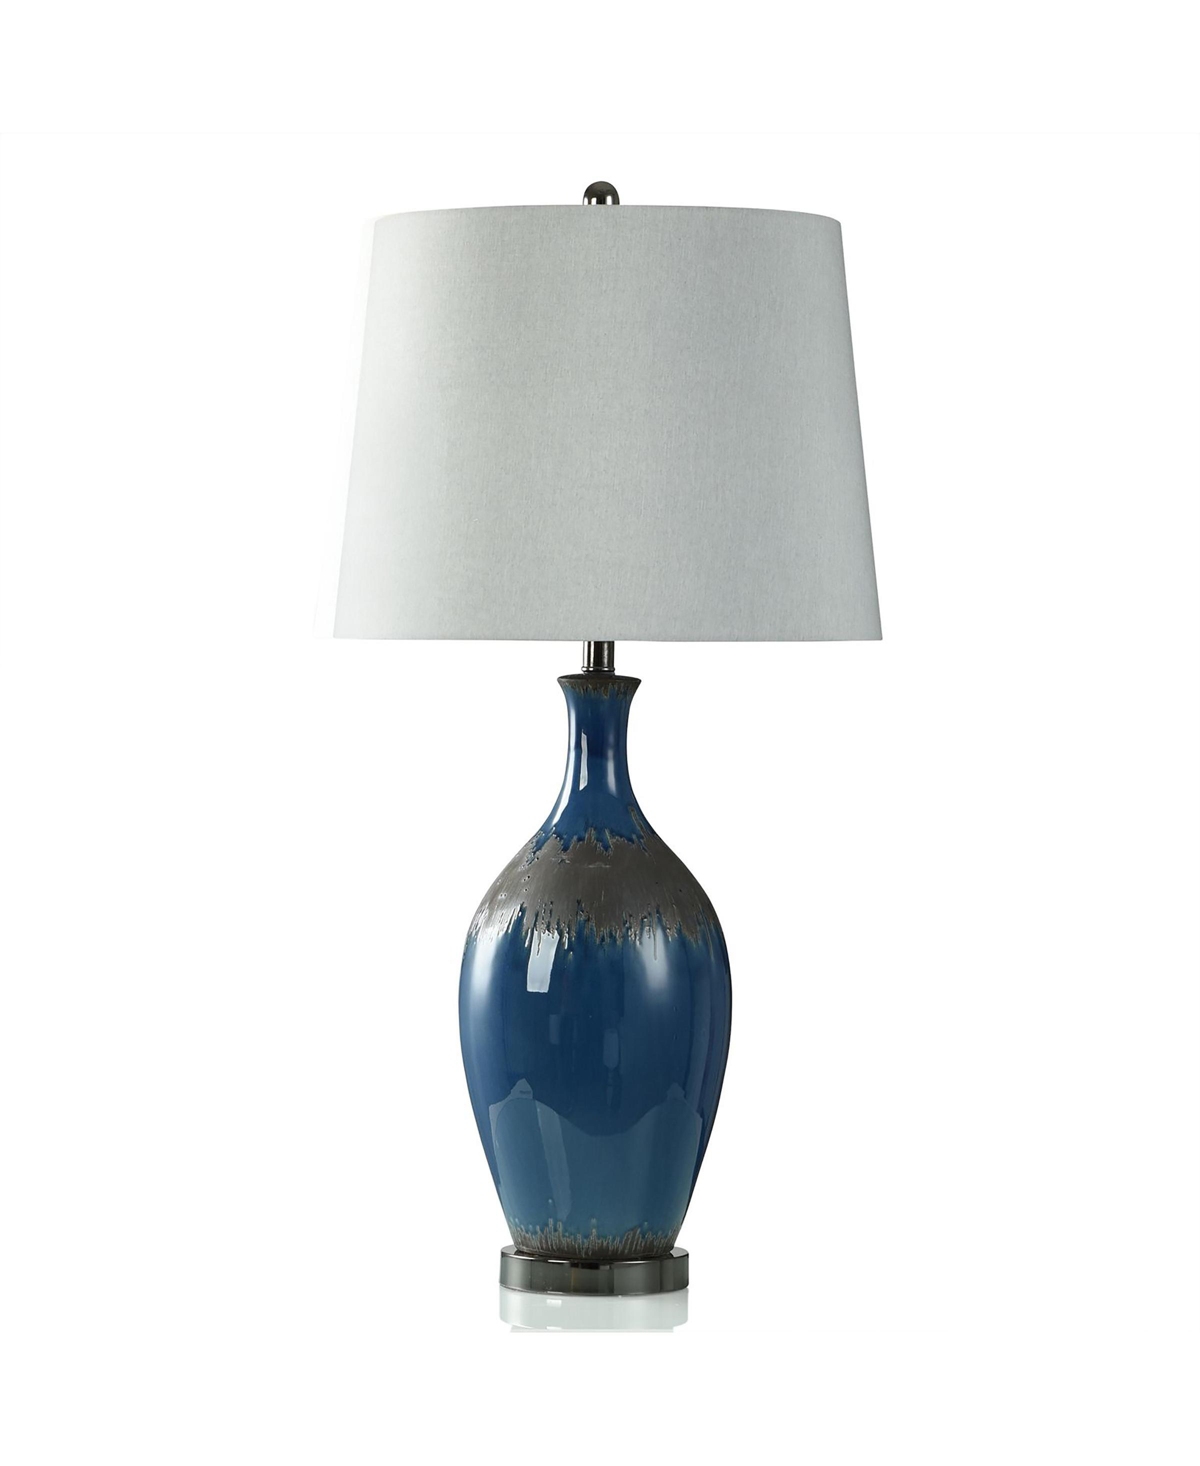 Stylecraft Home Collection 35" Bowie Two Tone Matte And Glaze Base Table Lamp In Blue Glazed,matte Brown,black Nickel